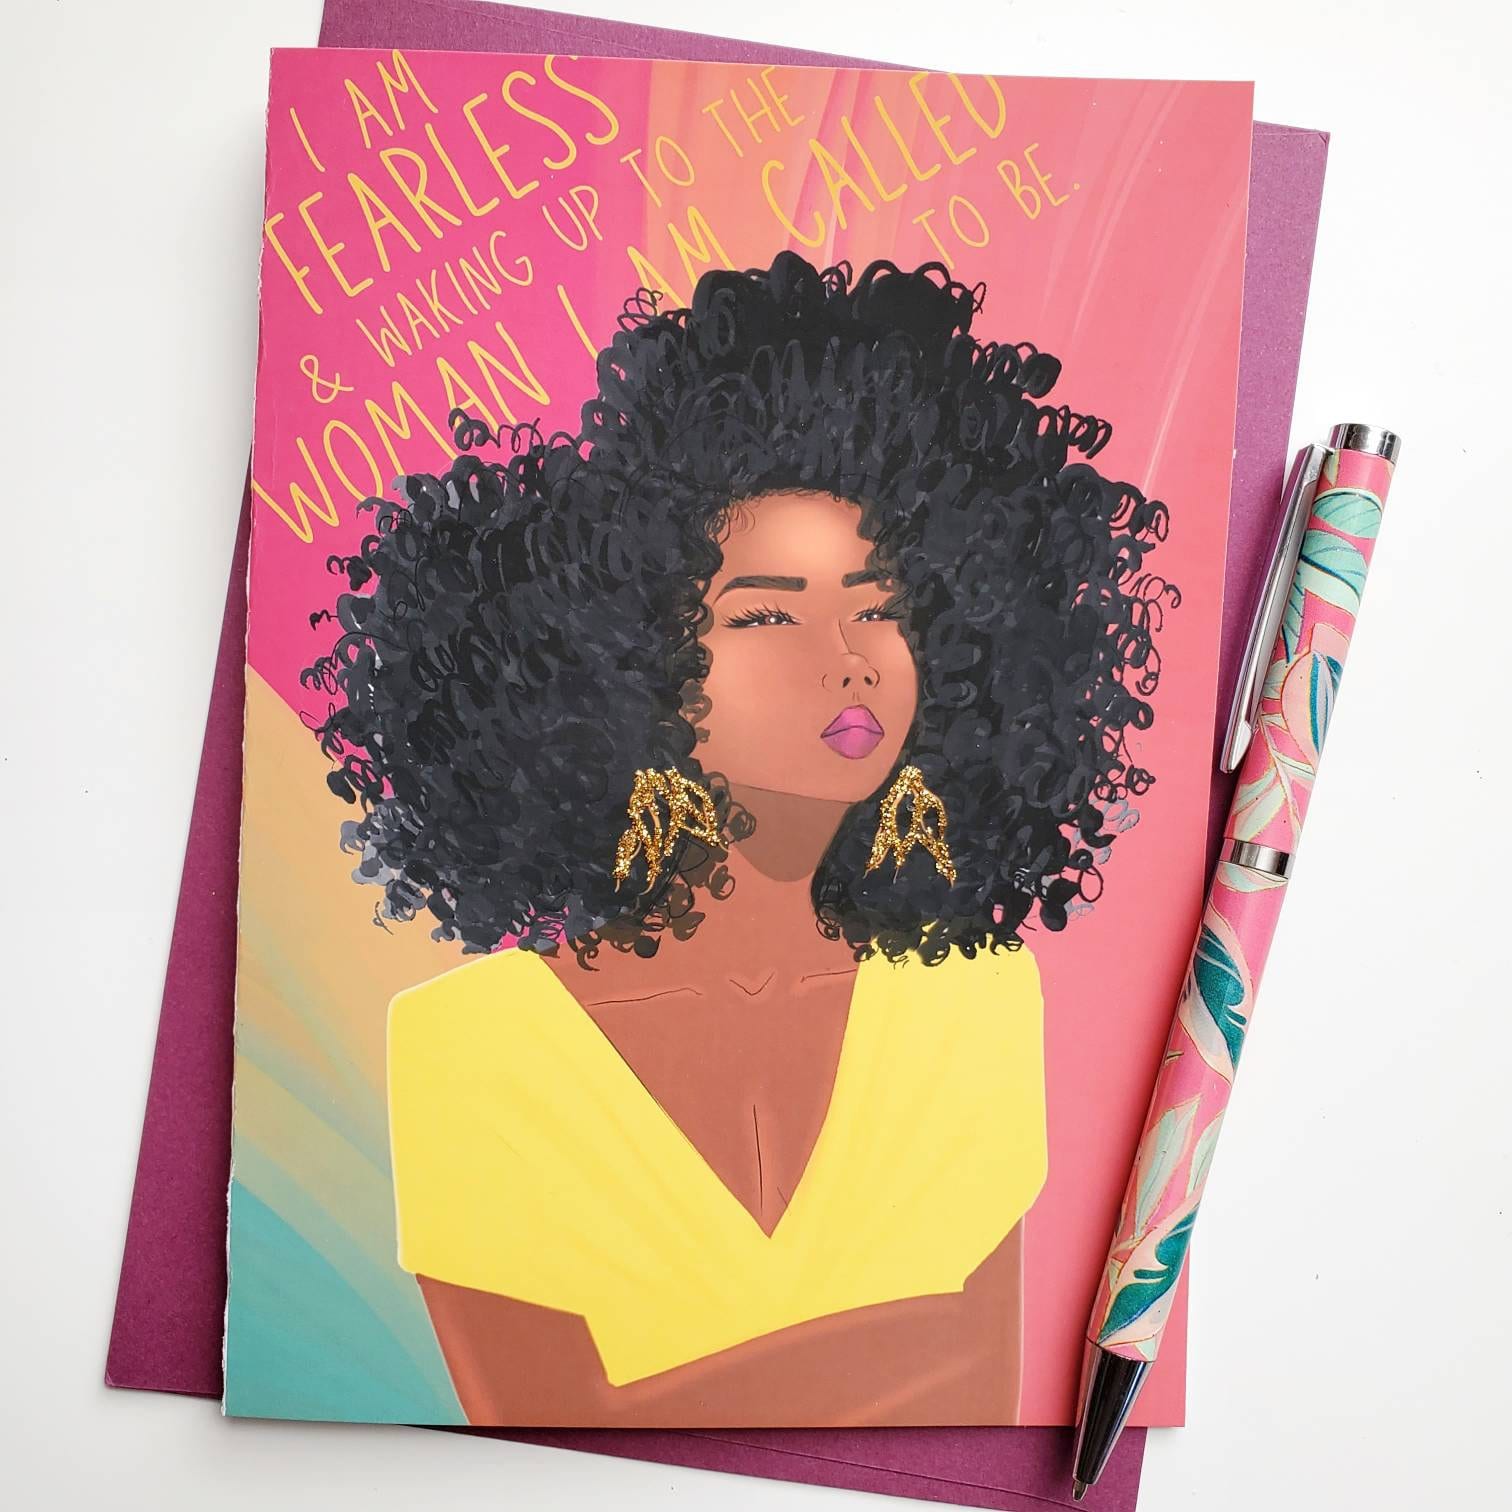 Fearless & Waking Up On Me - Self Affirmation/Empowerment Greeting Card | Black Girl Greetings | Woman | Illustration | Natural Hair